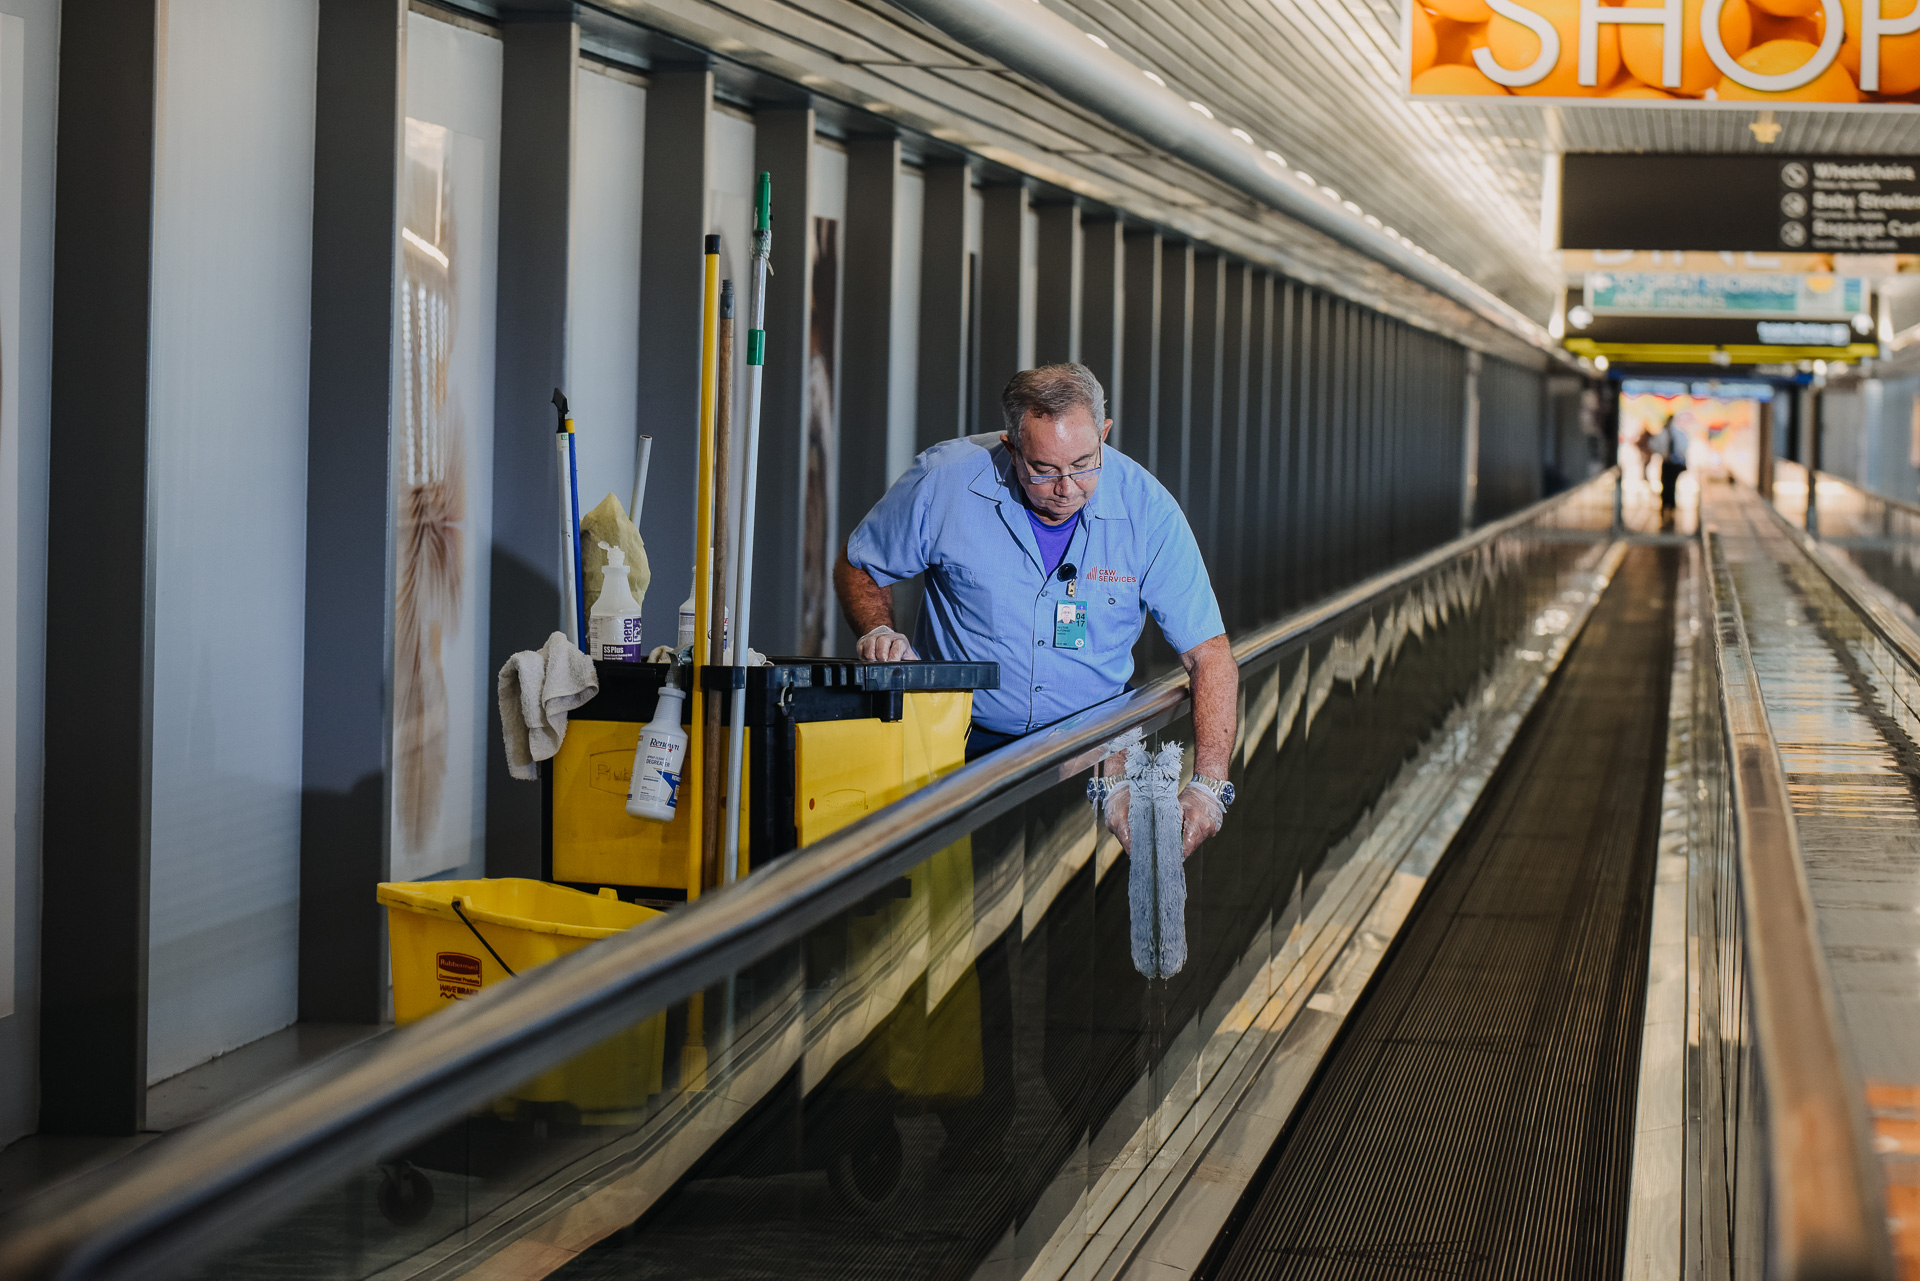 A man cleaning a moving walkway at an airport.